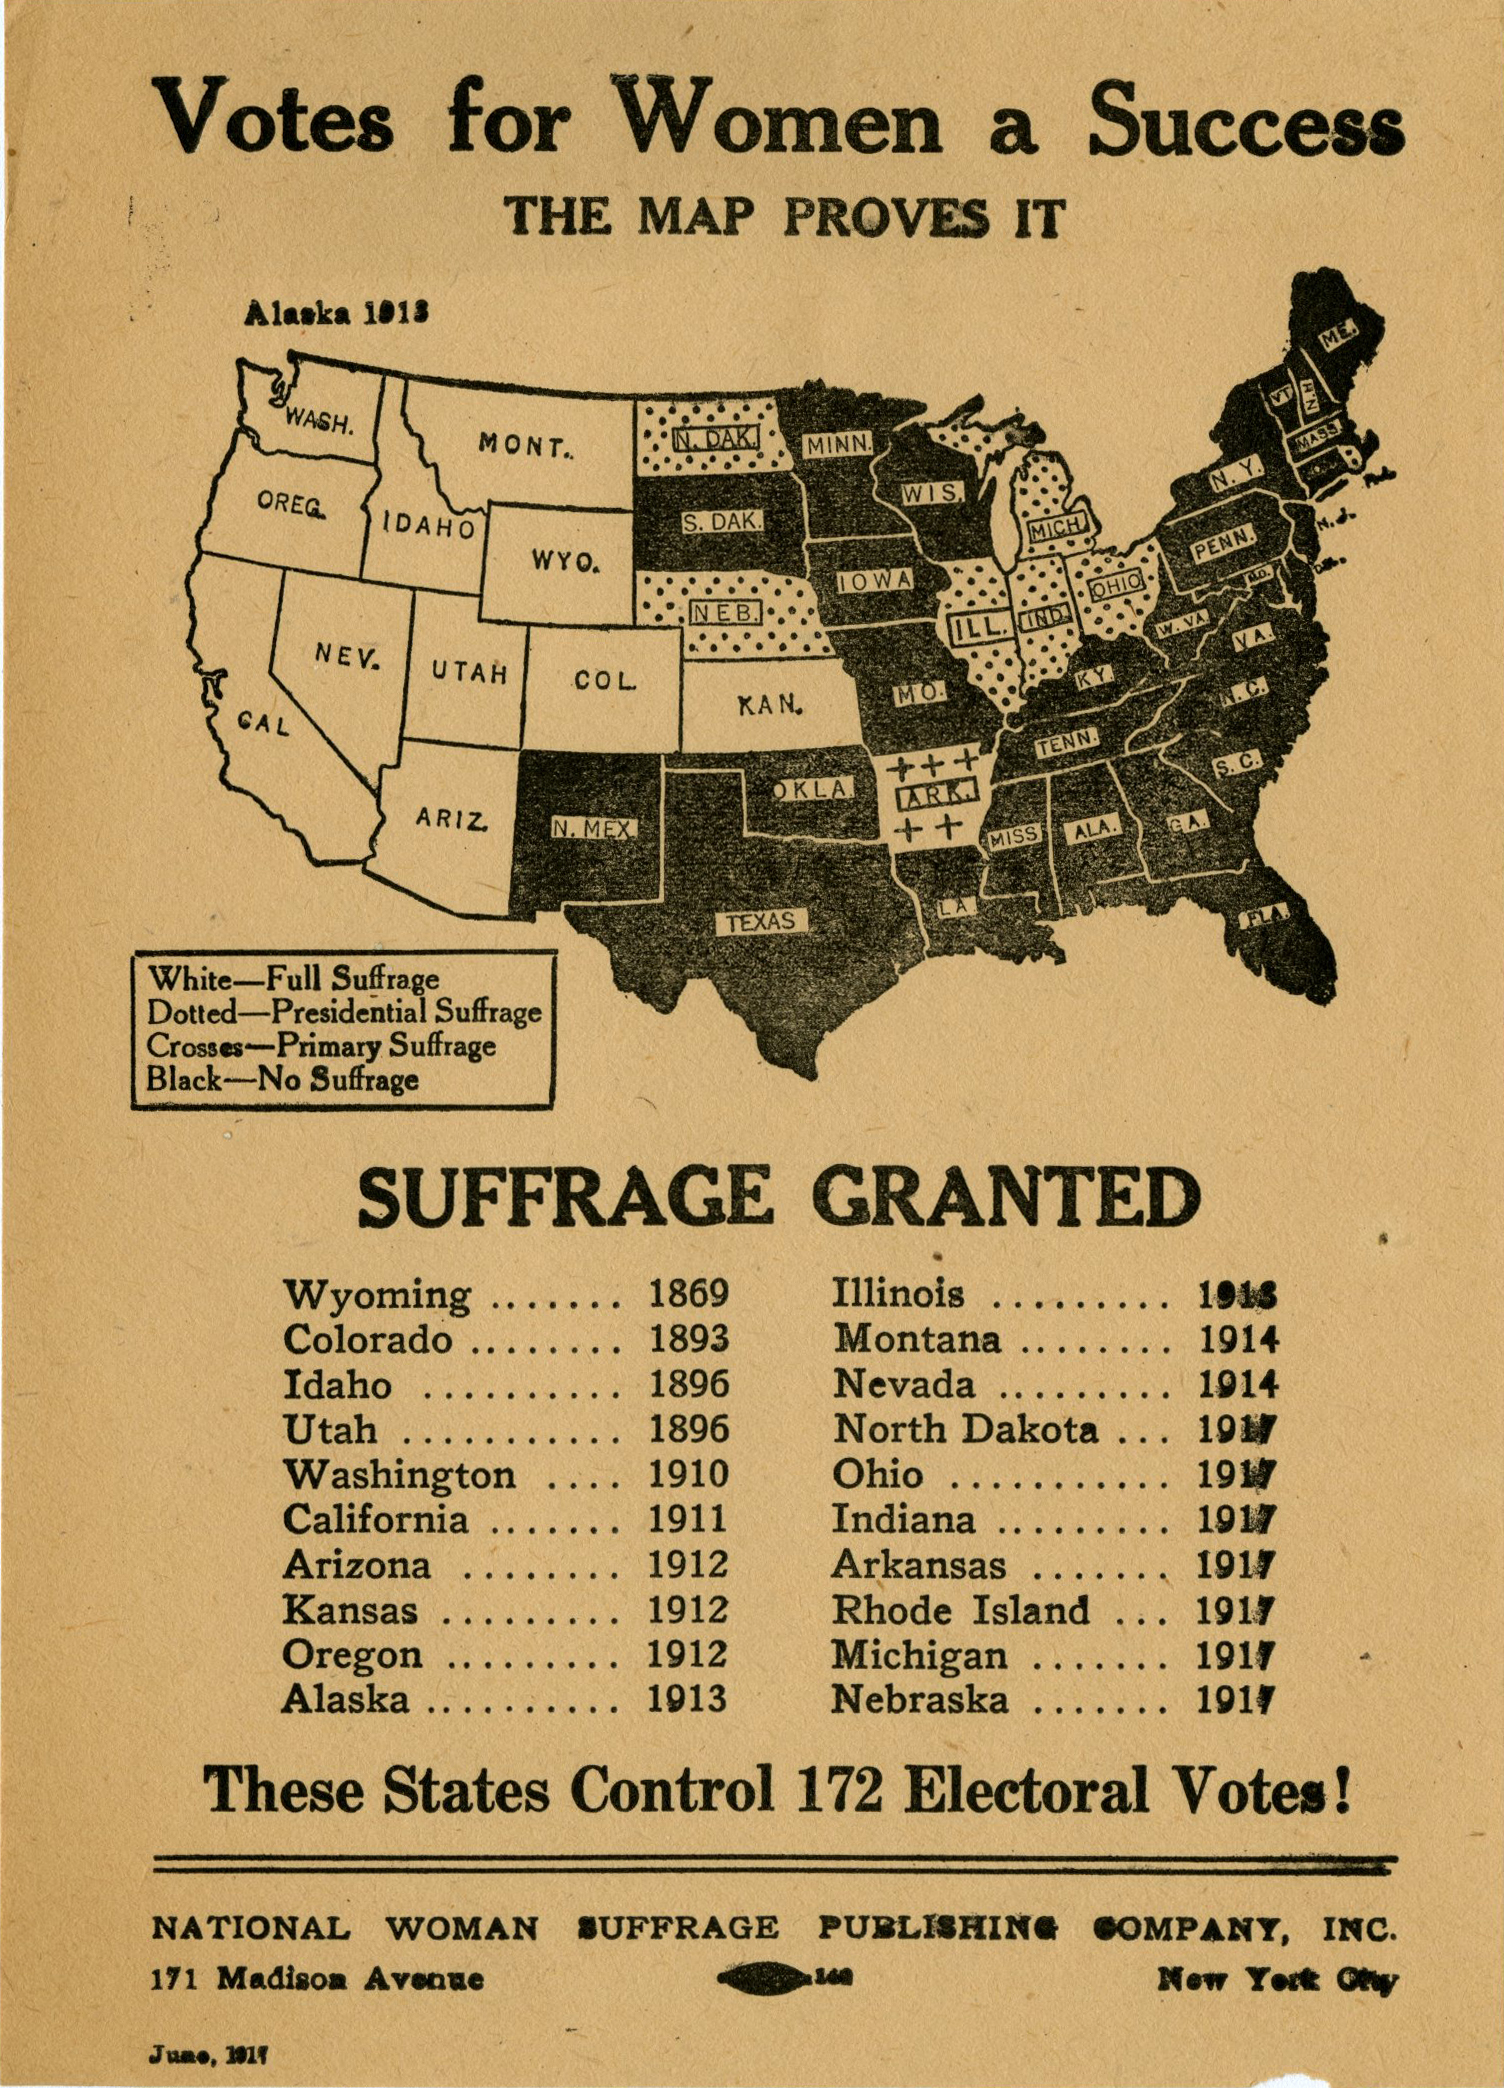 “Votes for Women a Success: The map proves it. SUFFRAGE GRANTED.”